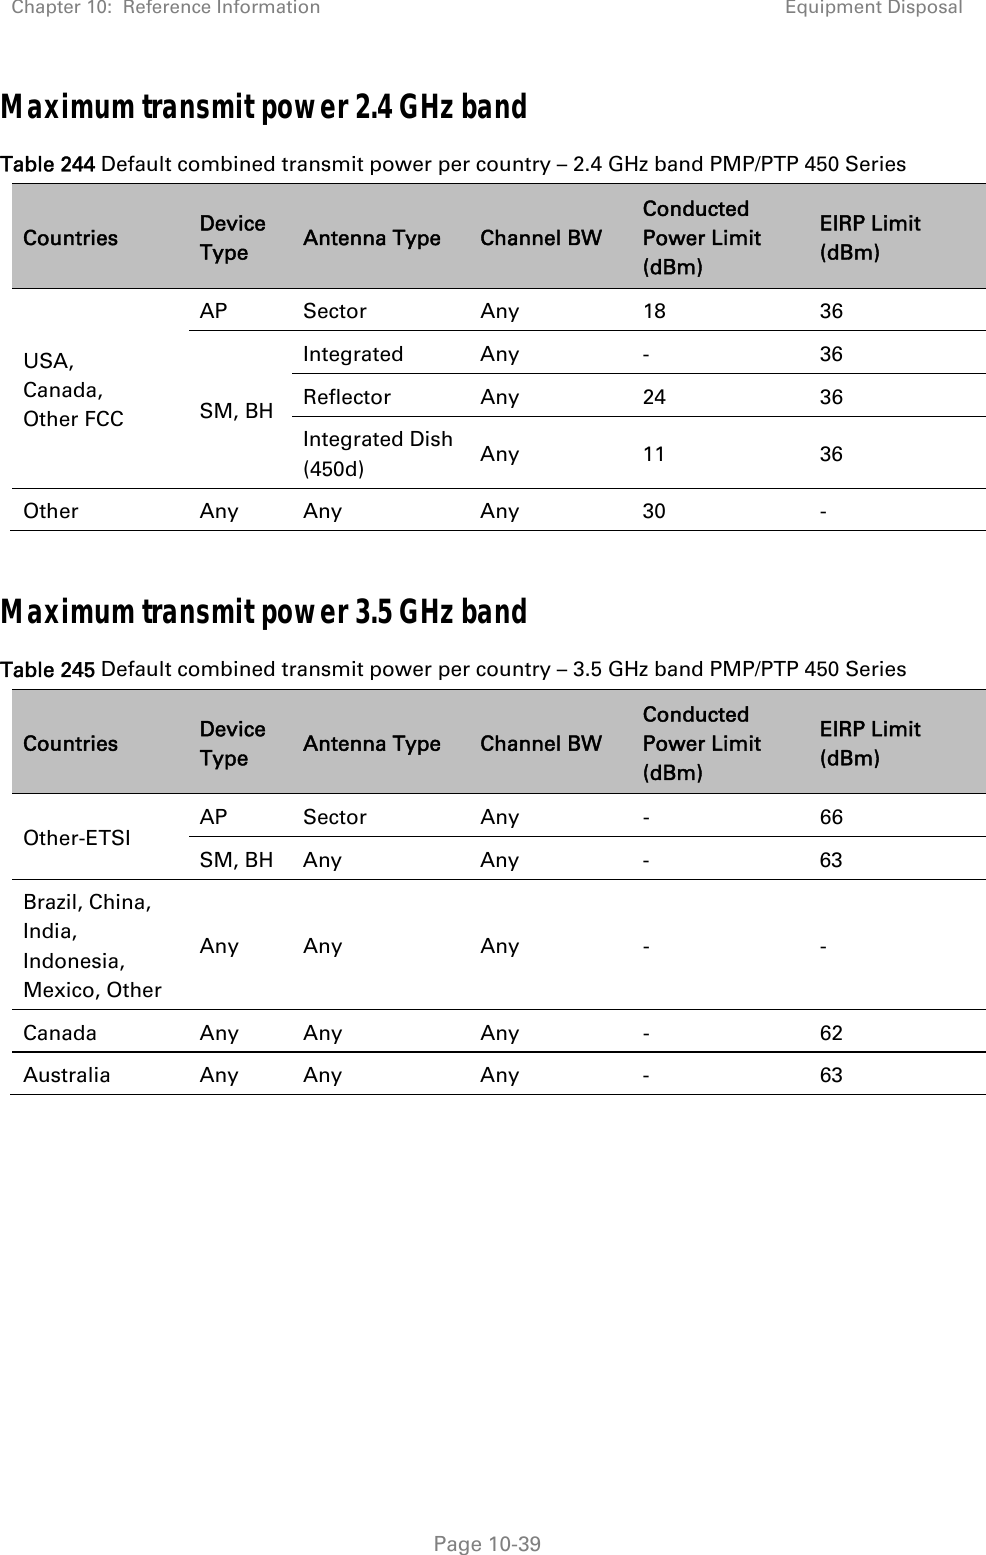 Chapter 10:  Reference Information Equipment Disposal   Page 10-39 Maximum transmit power 2.4 GHz band Table 244 Default combined transmit power per country – 2.4 GHz band PMP/PTP 450 Series Countries  Device Type  Antenna Type  Channel BW Conducted Power Limit (dBm) EIRP Limit (dBm) USA, Canada, Other FCC AP Sector  Any  18  36 SM, BH Integrated Any  -  36 Reflector Any  24  36 Integrated Dish (450d)  Any 11  36 Other Any Any  Any 30  -  Maximum transmit power 3.5 GHz band Table 245 Default combined transmit power per country – 3.5 GHz band PMP/PTP 450 Series  Countries  Device Type  Antenna Type  Channel BW Conducted Power Limit (dBm) EIRP Limit (dBm) Other-ETSI AP Sector  Any  -  66 SM, BH  Any  Any  -  63 Brazil, China, India, Indonesia, Mexico, Other Any Any  Any  -  - Canada Any Any  Any  -  62 Australia Any Any  Any  -  63    